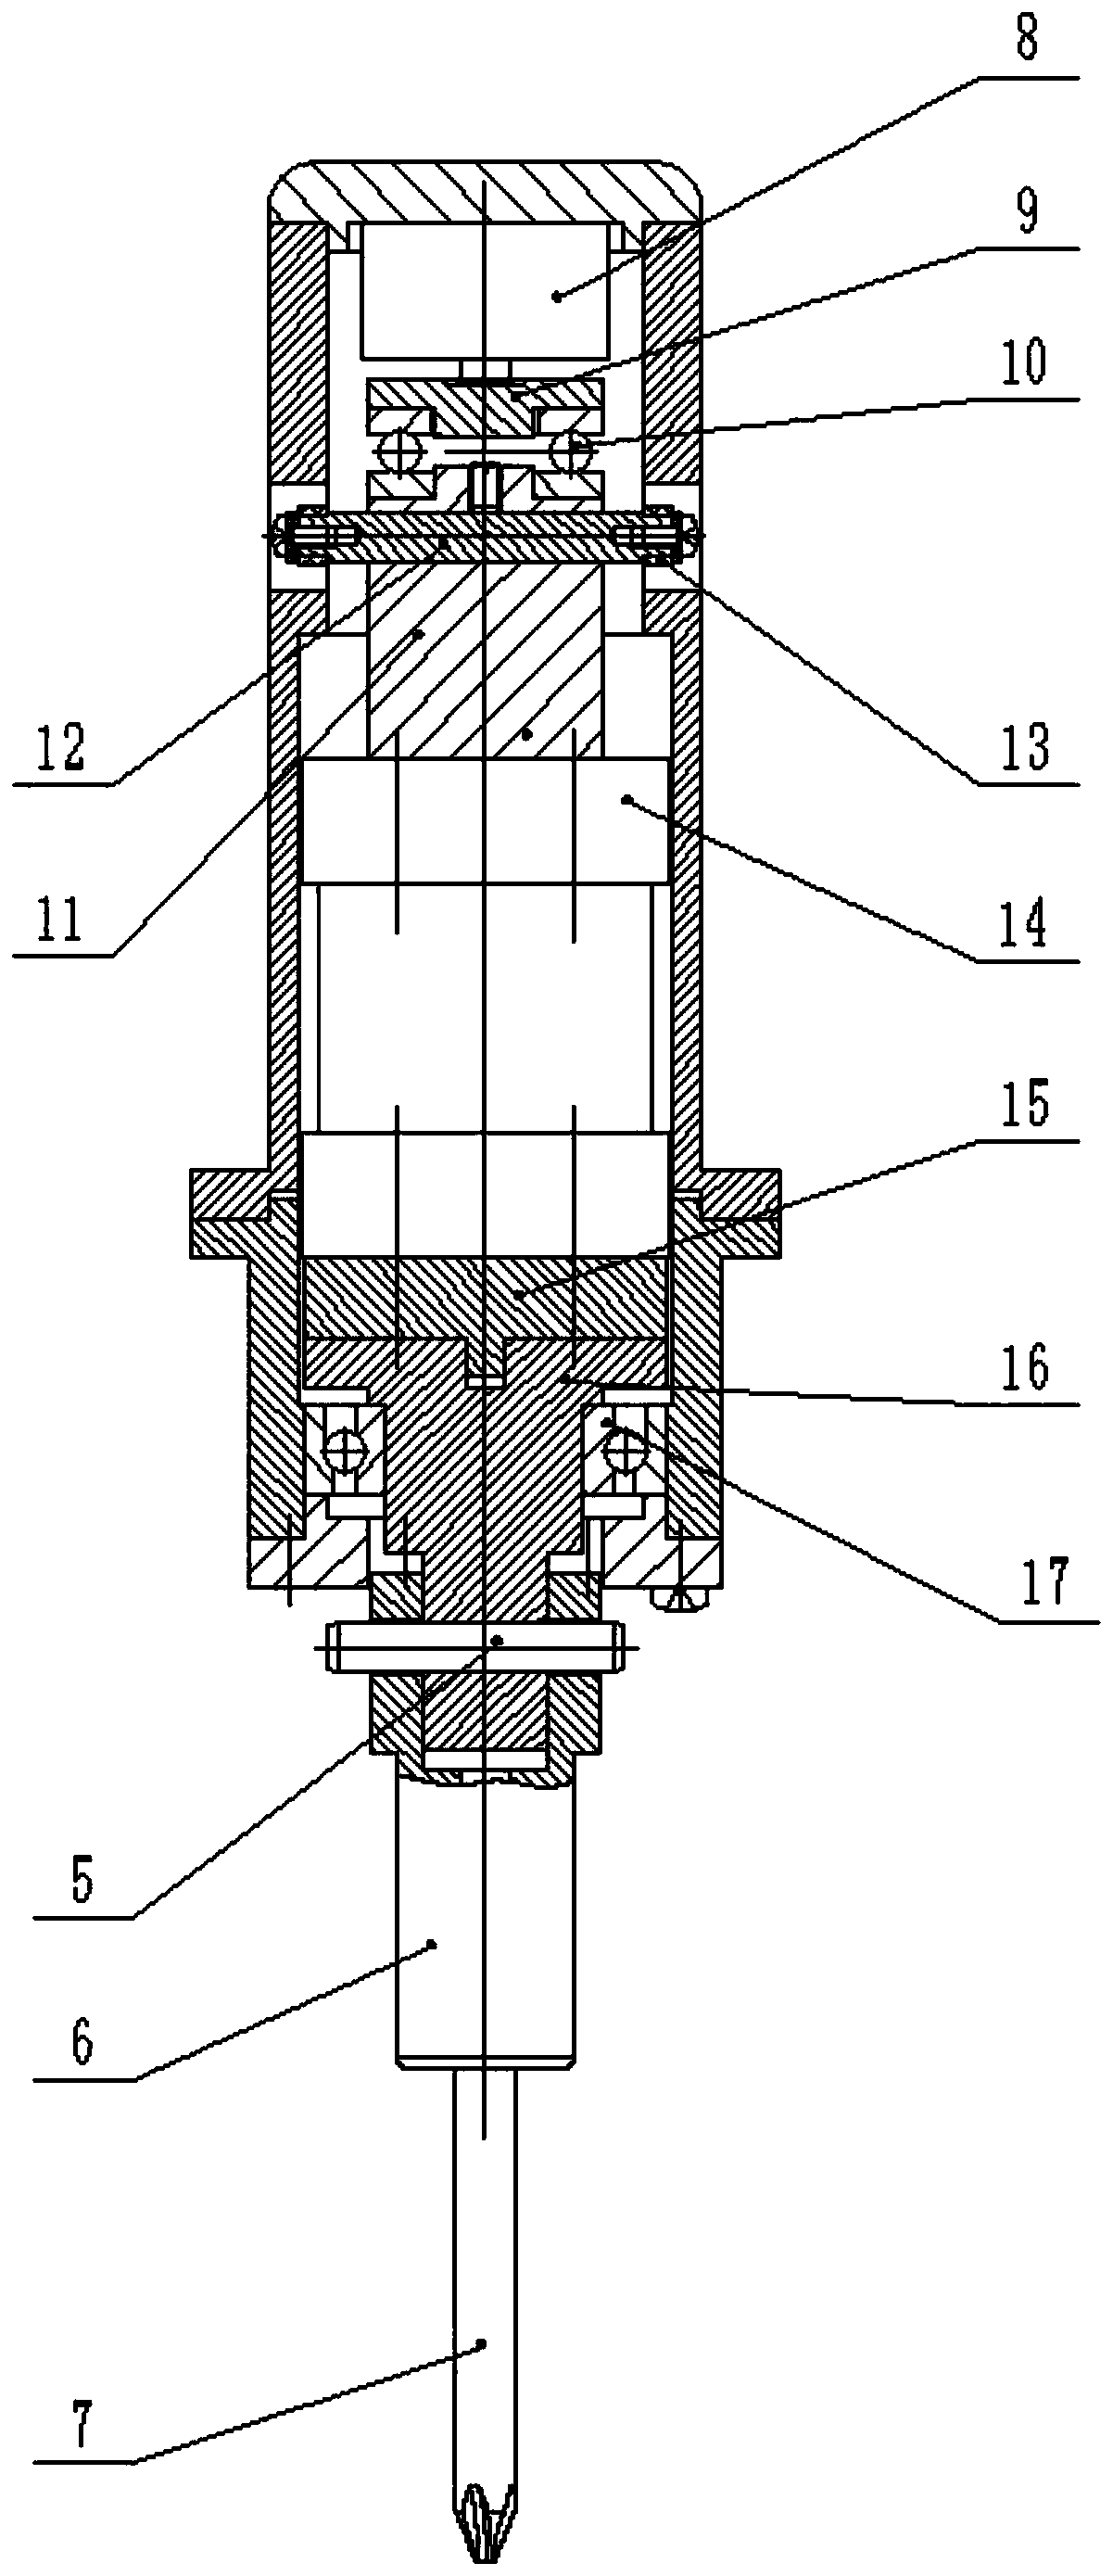 A measuring device and method for studying the effect of compression force on torque coefficient